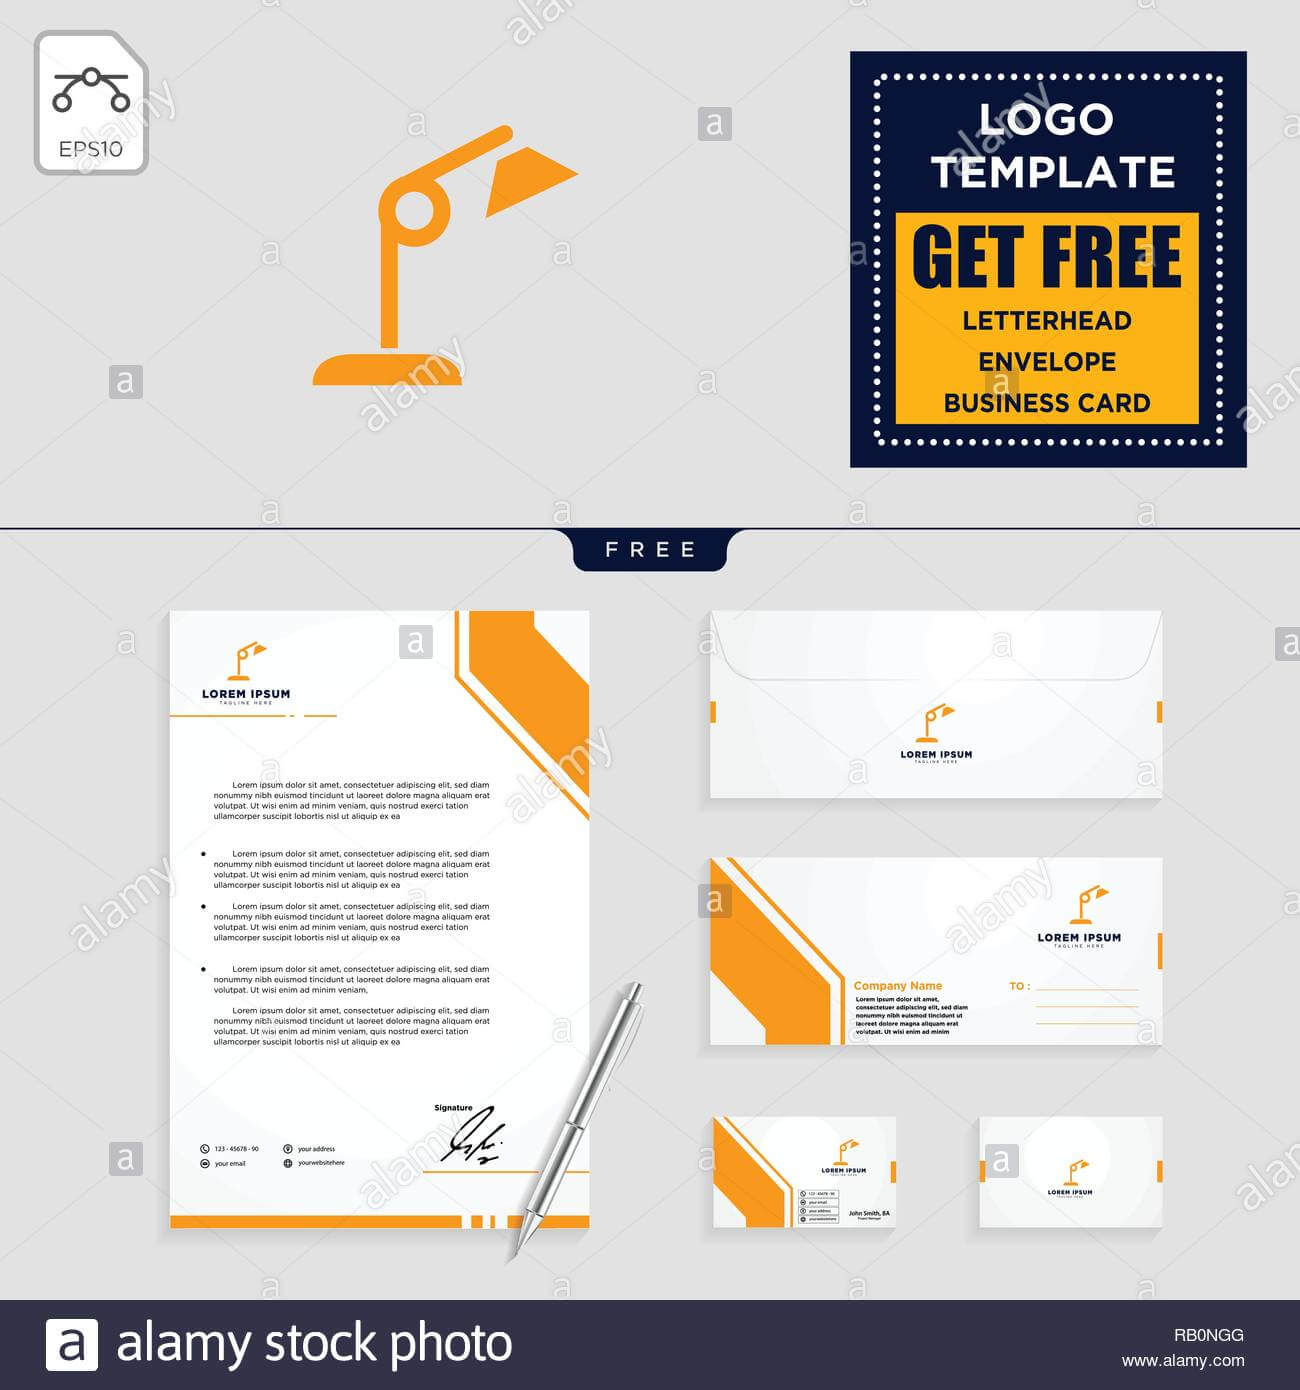 Light Interior Logo Template, Vector Illustration And Throughout Business Card Letterhead Envelope Template